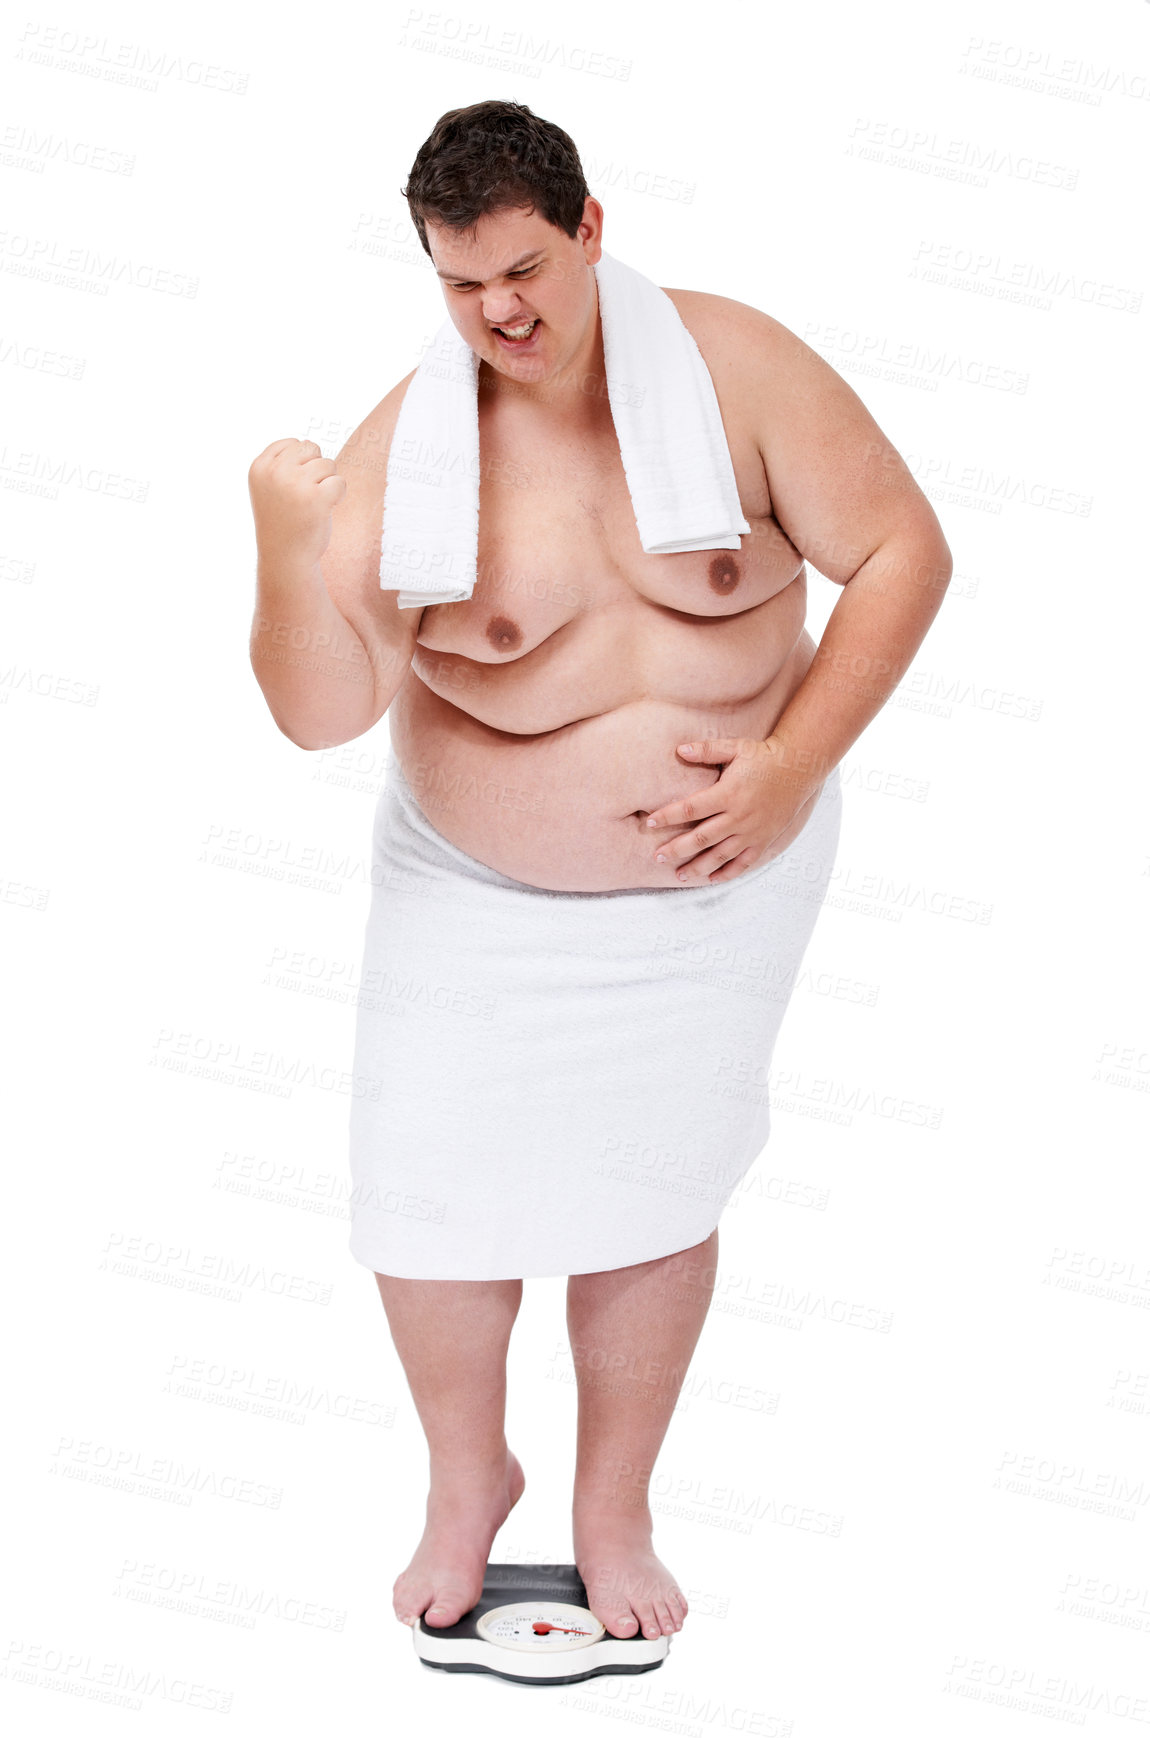 Buy stock photo An overweight young man looking pleased with himself after weighing in on a scale